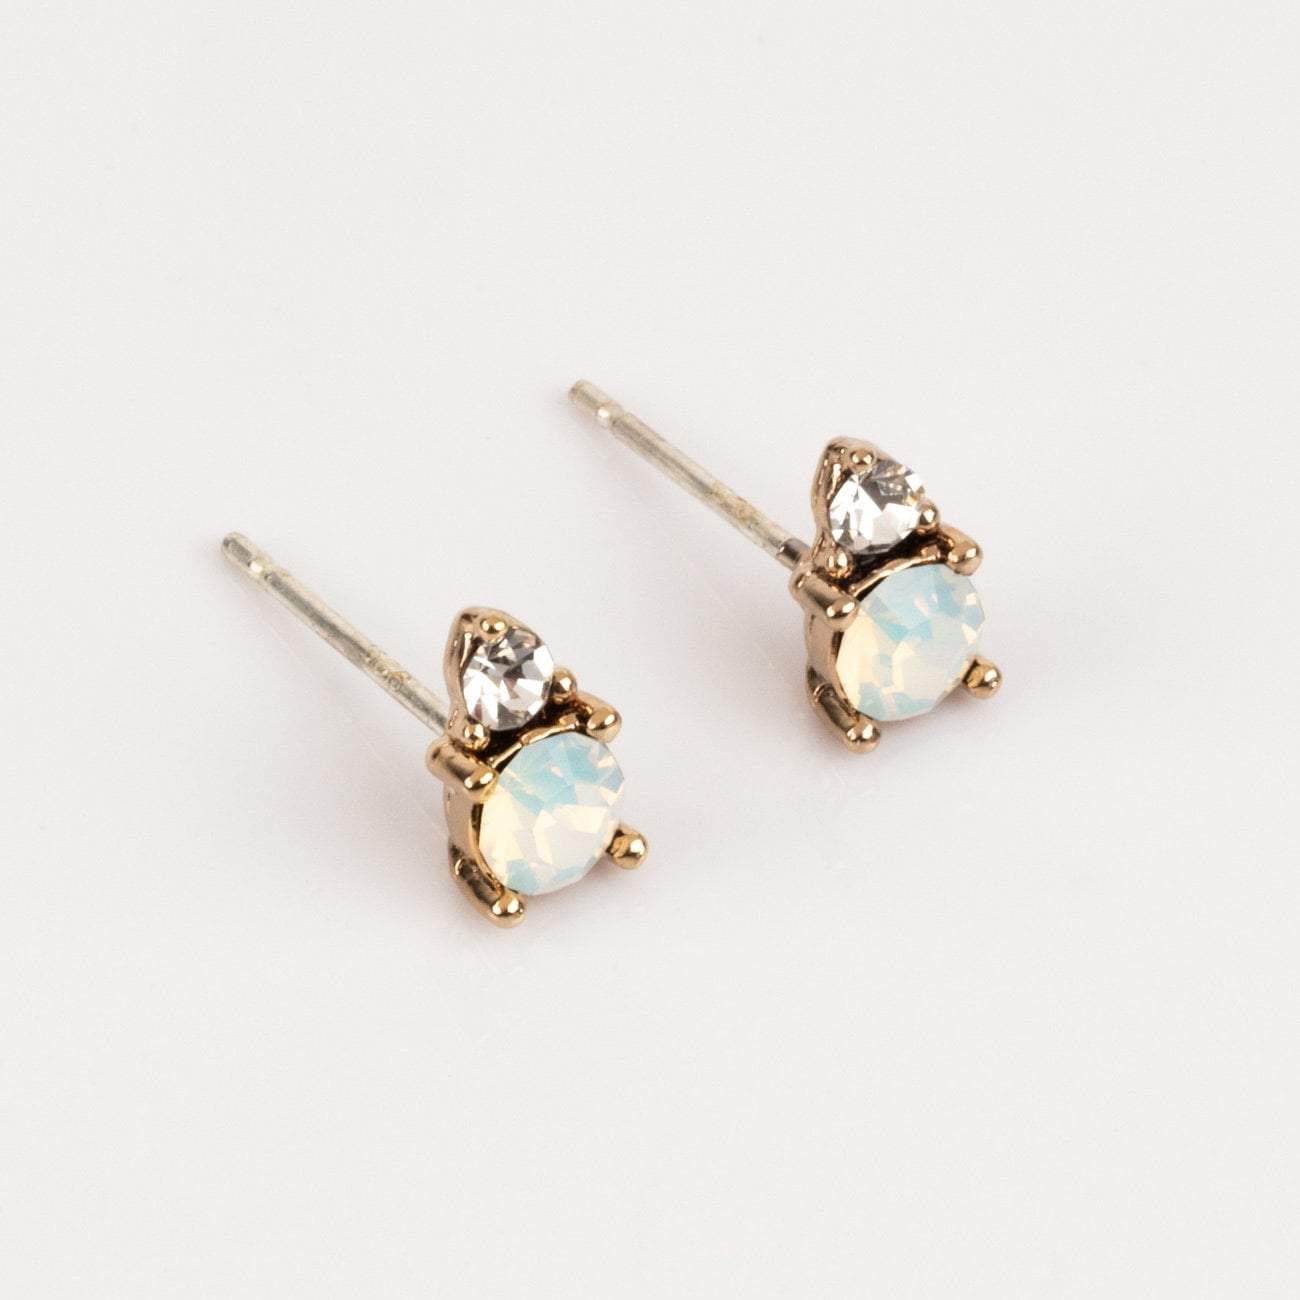 Dolce Studs in White Opal earrings Lover's Tempo 